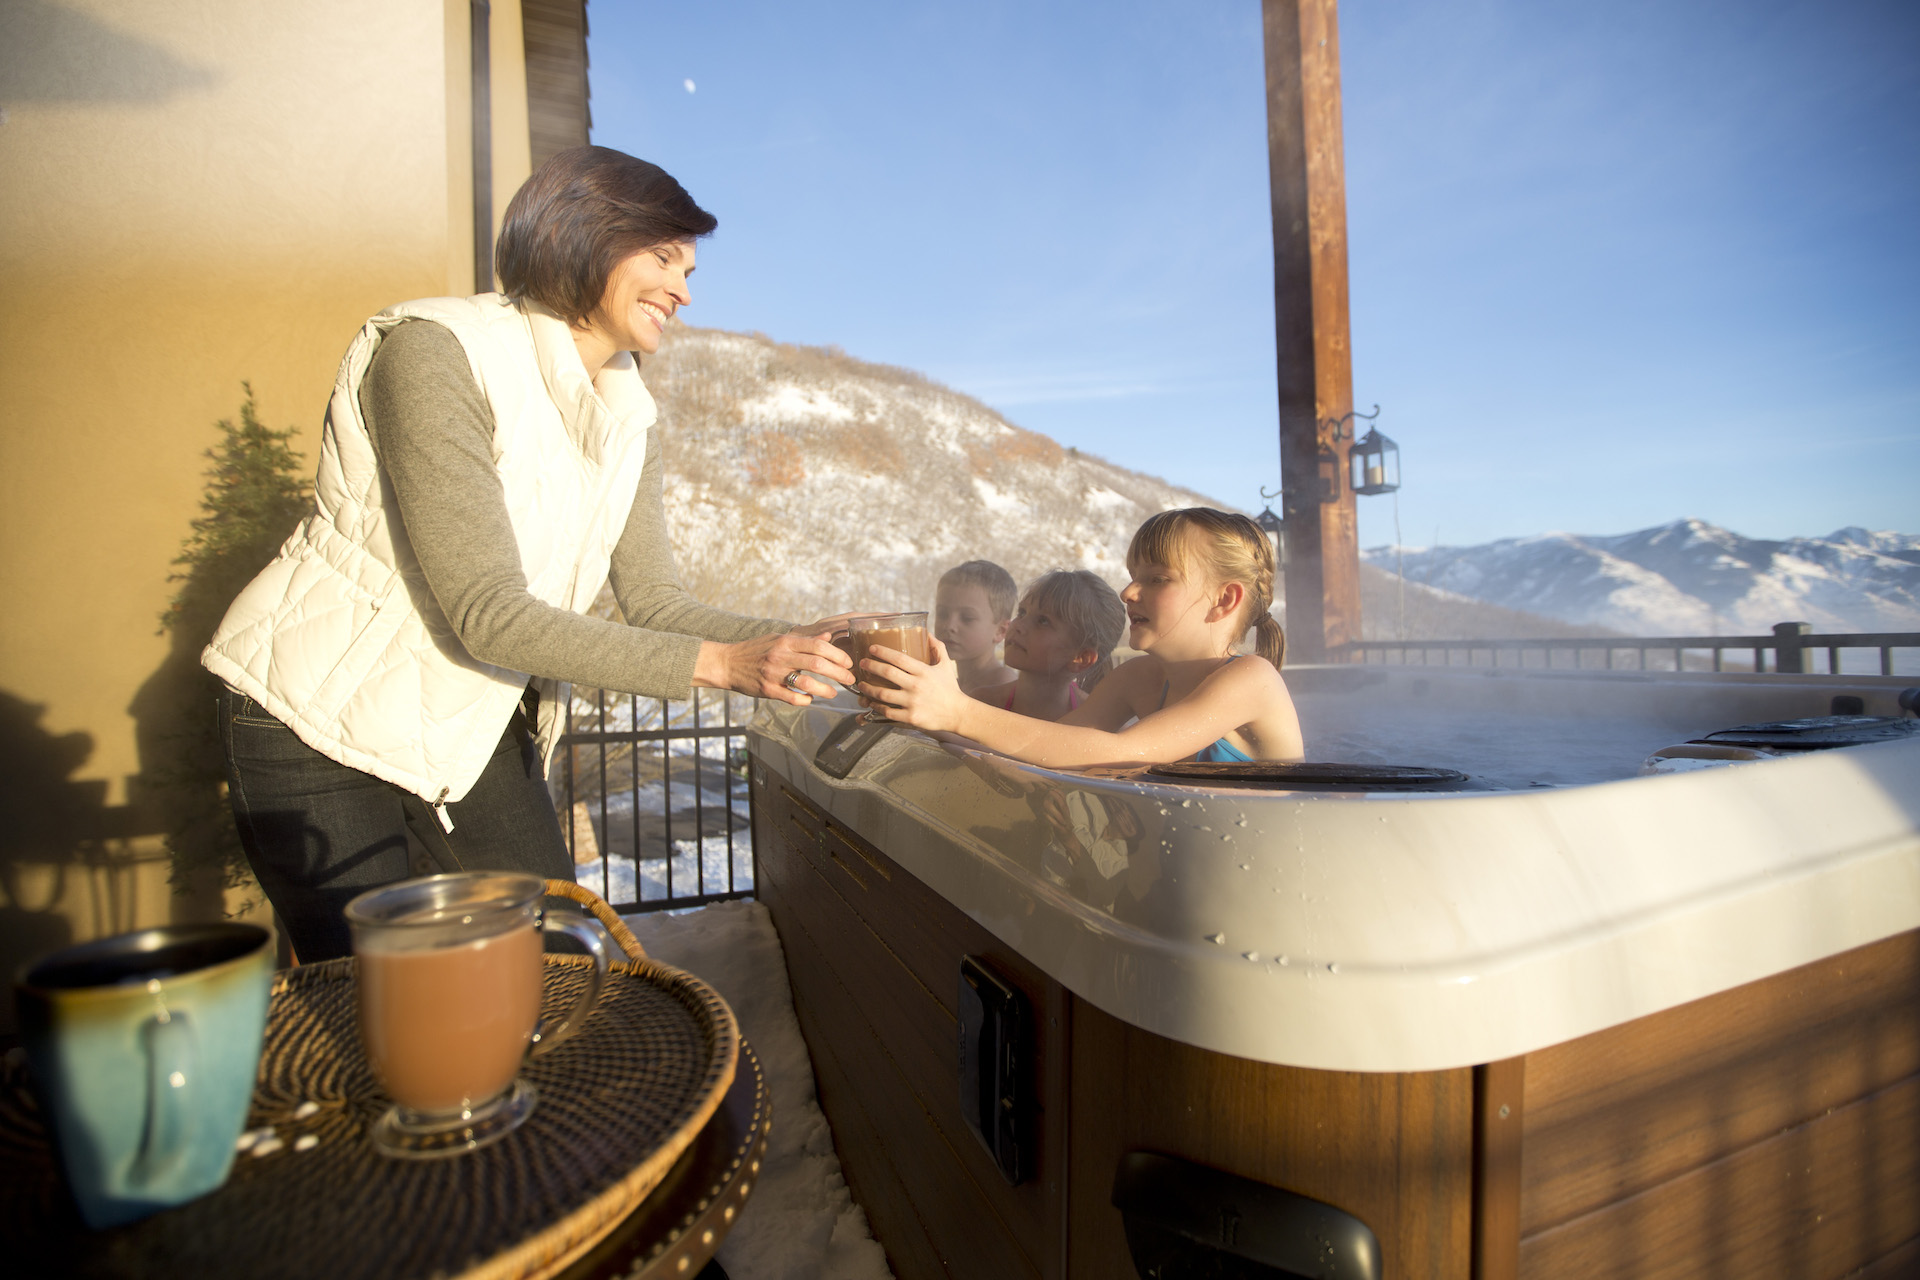 hot-tub-cleaning-service-repair-fort-collins-hot-tub-patrol